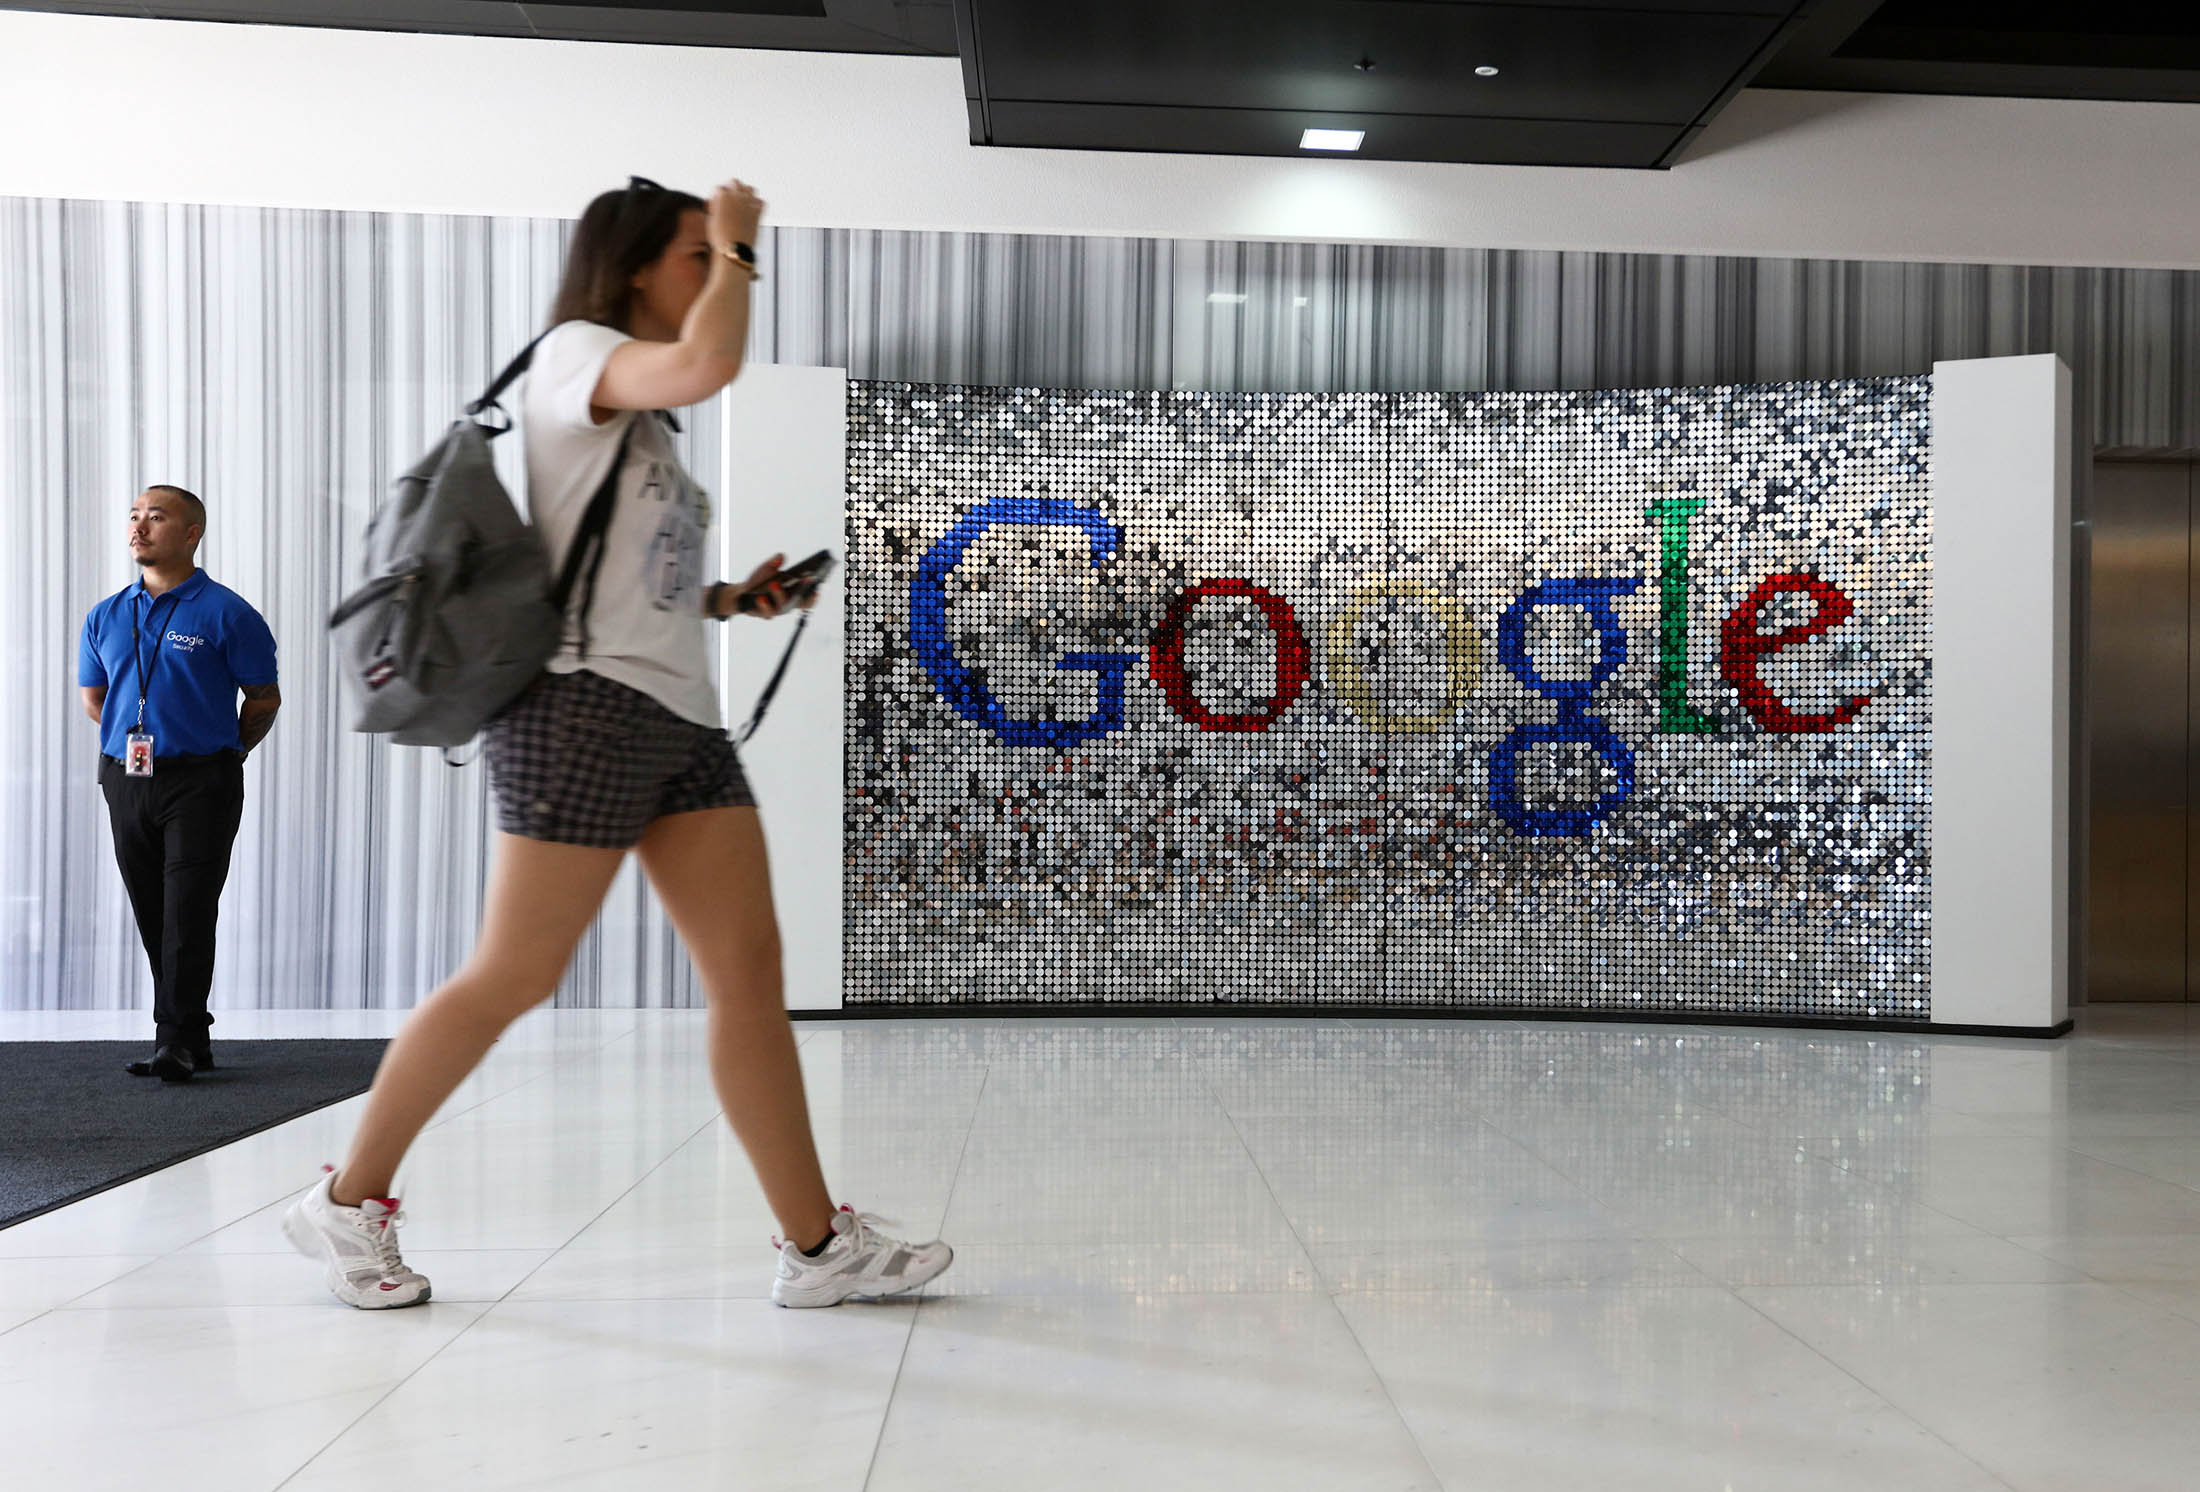 A visitor passes a sign featuring Google Inc.'s logo inside their new U.K. headquarters at Six St Pancras Square in London, U.K., on Tuesday, June 21, 2016. The owner of the world's largest search engine built its new U.K. headquarters on 2.4 acres (1 hectare) of land that's part of a larger development by King's Cross Central LP near the Eurostar rail link to mainland Europe.
